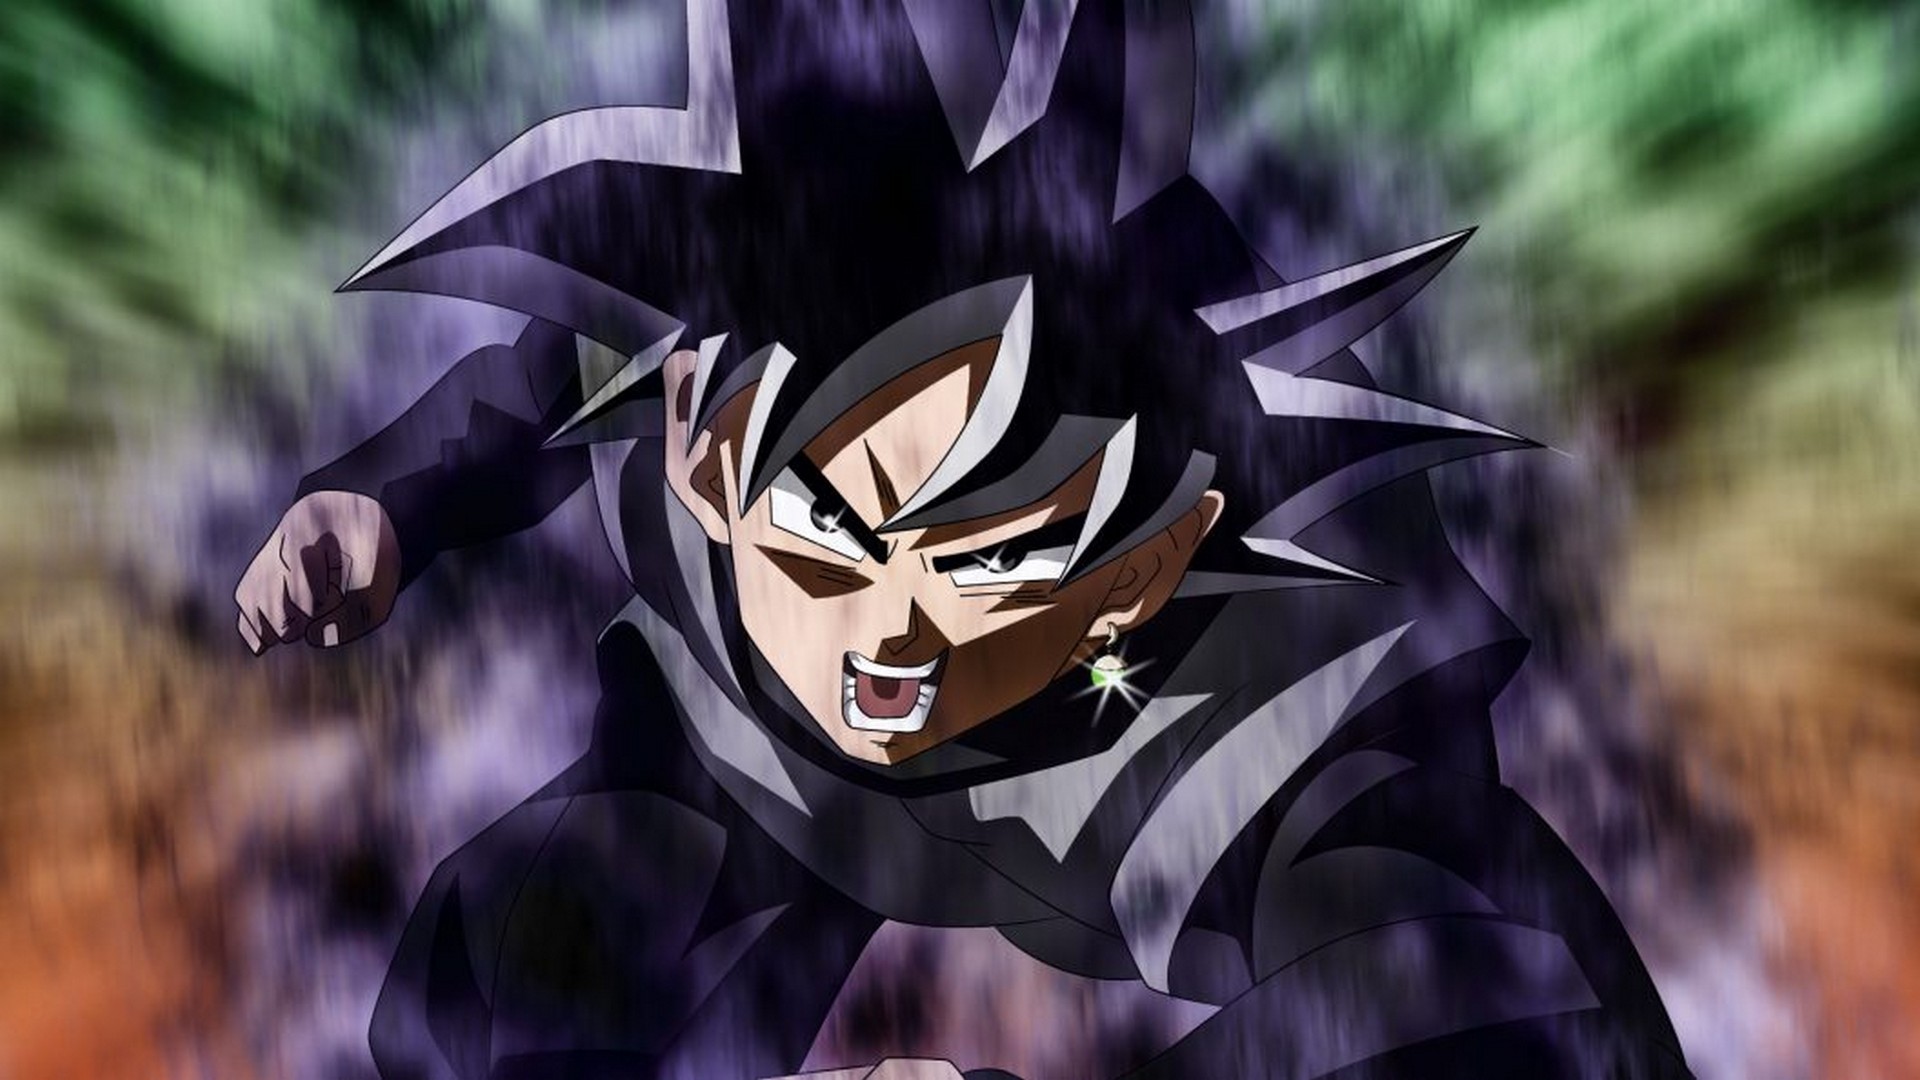 Black Goku Wallpaper HD with image resolution 1920x1080 pixel. You can make this wallpaper for your Desktop Computer Backgrounds, Mac Wallpapers, Android Lock screen or iPhone Screensavers